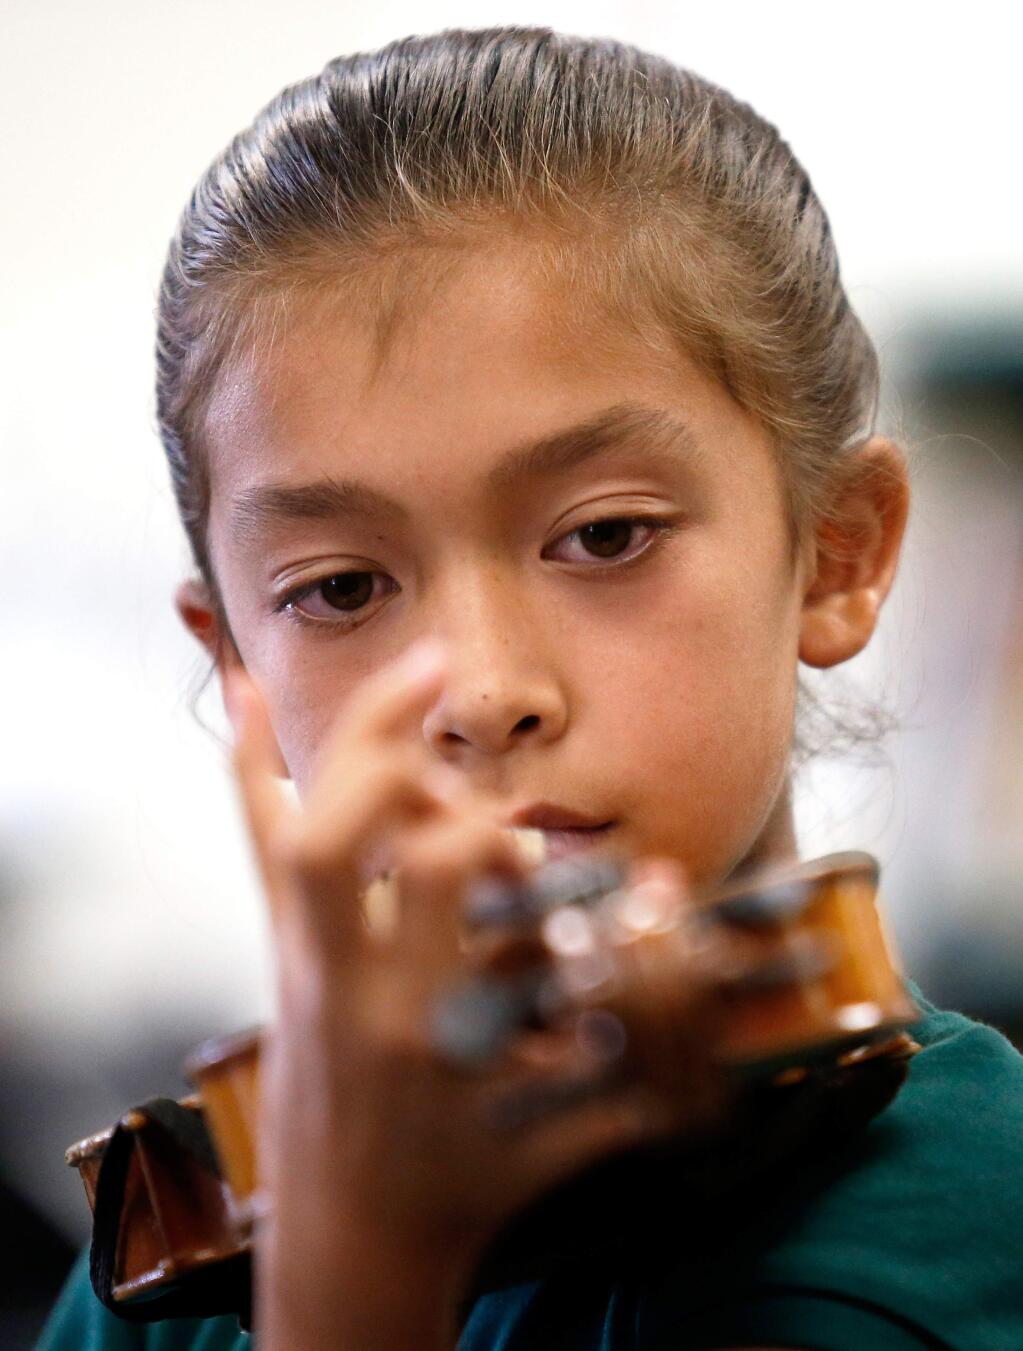 Sixth grader Sofia Santana, 10, plucks a few notes on her violin after she and her classmates received their instruments for the first time during the music blitz program at Luther Burbank Elementary School in Santa Rosa, California, on Thursday, September 13, 2018. (Alvin Jornada / The Press Democrat)